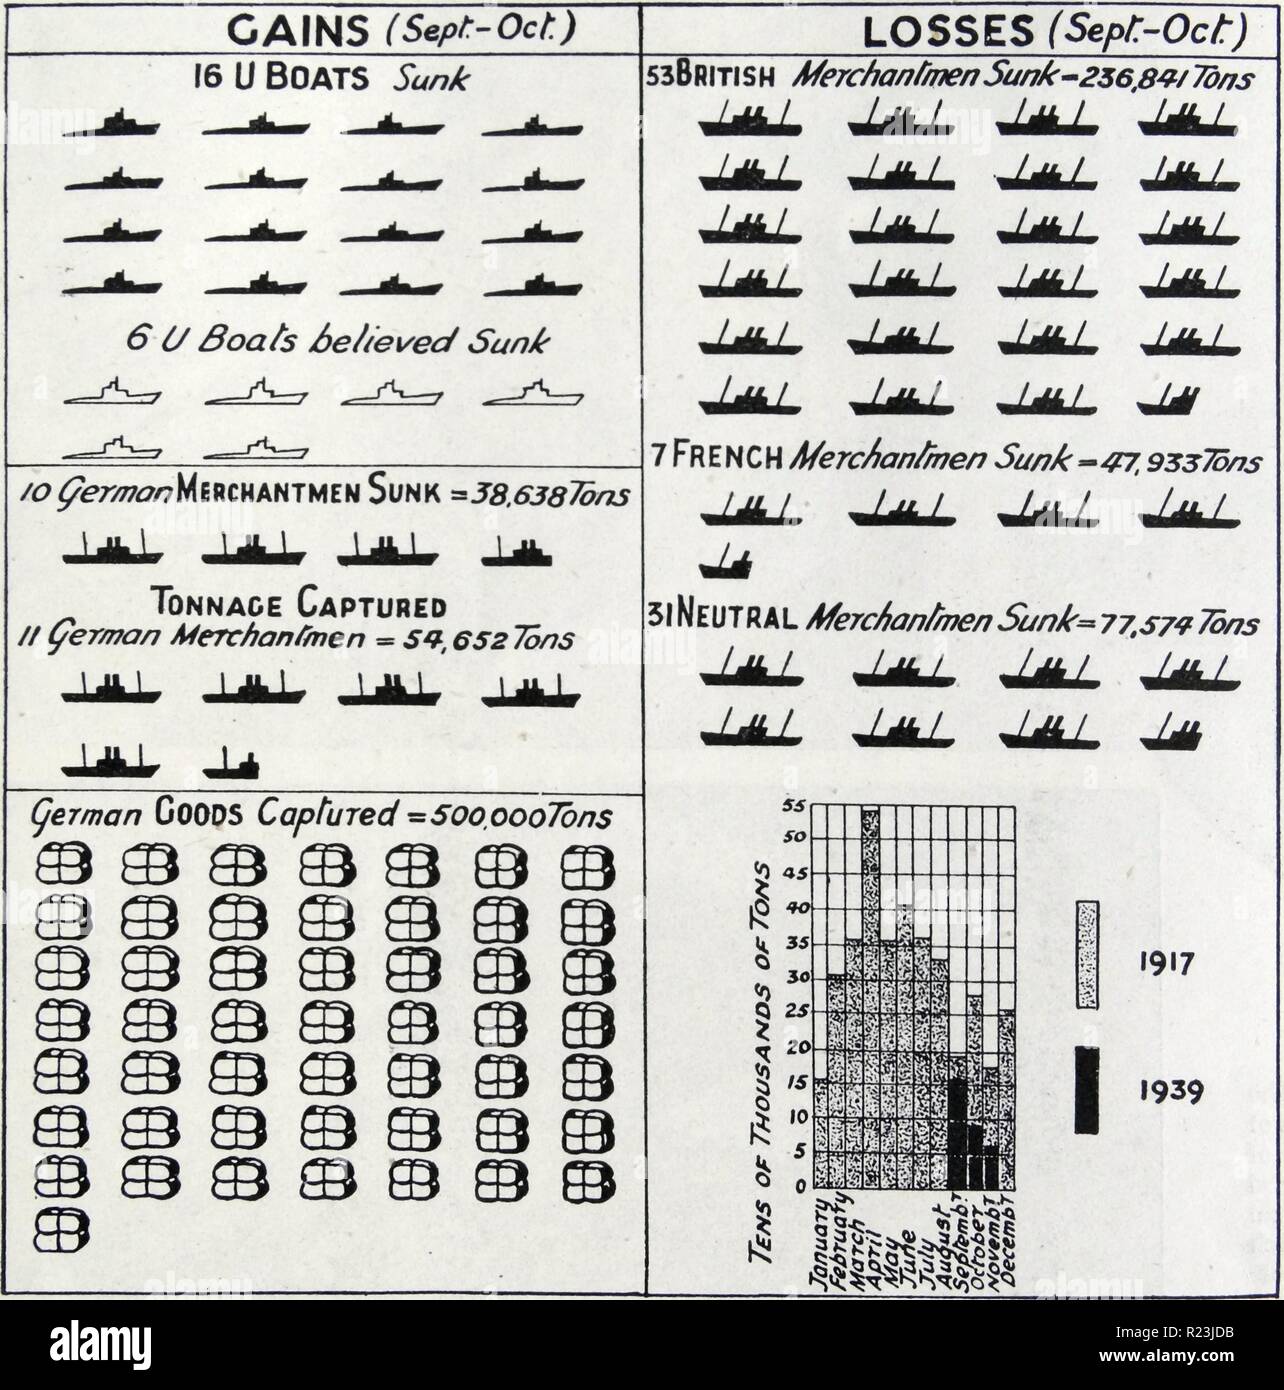 Picture diagram of the Economic War in Germany. The diagram shows the result of the first two months of economic warfare at sea. The right-hand bottom corner depicts the amount of British Merchant tonnage sunk during the months of September, October and November during 1939 in comparison to 1917. Dated 1939 Stock Photo